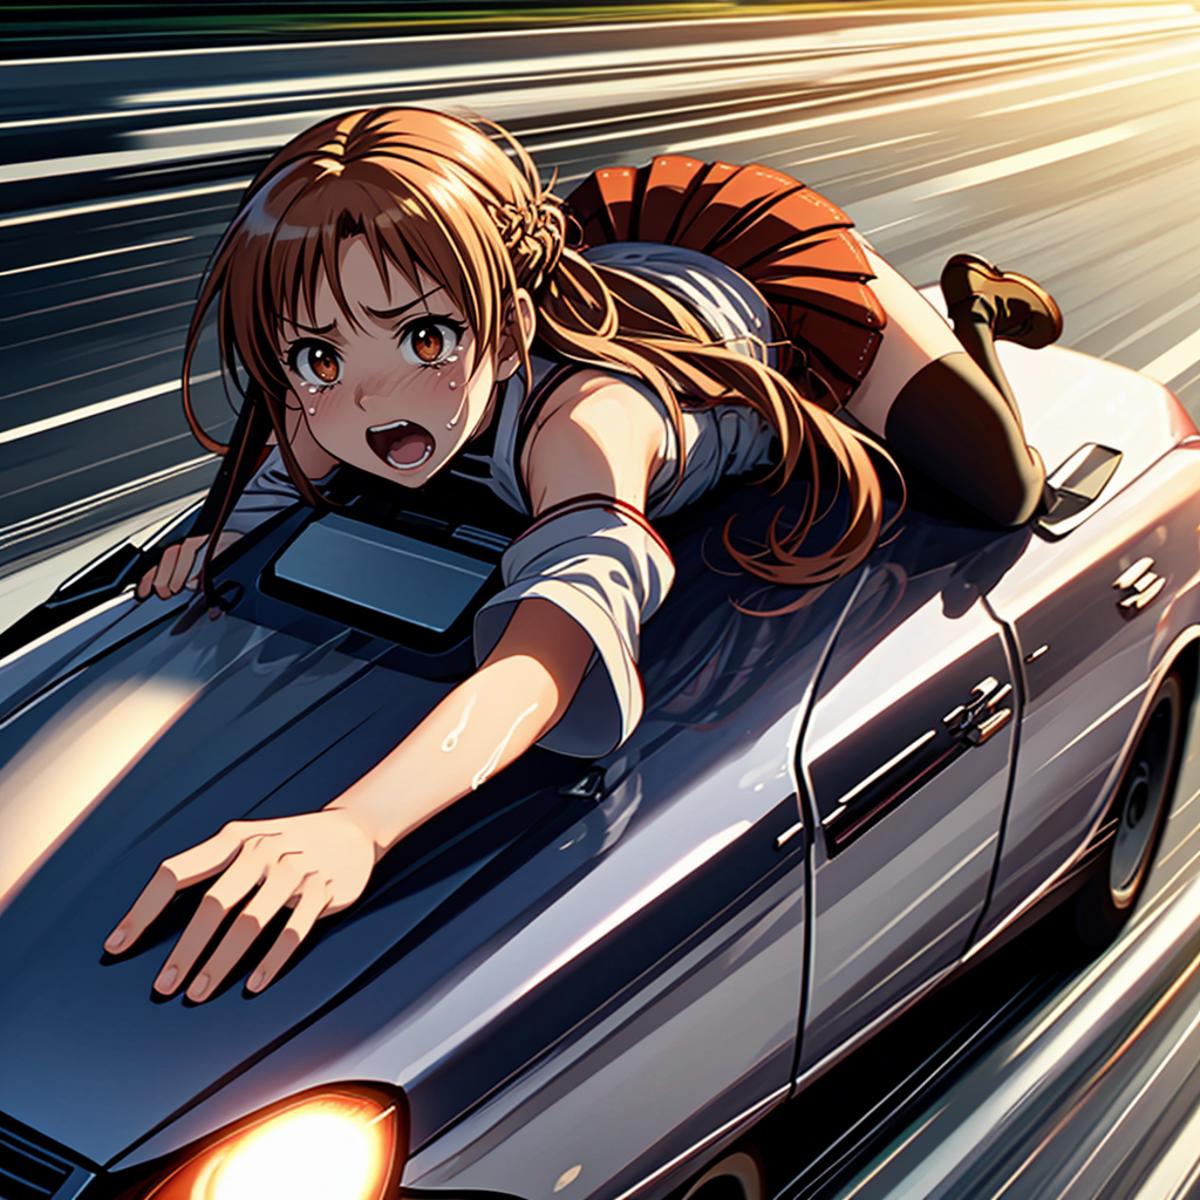 Anime girl with a short ponytail riding on the hood of a car.